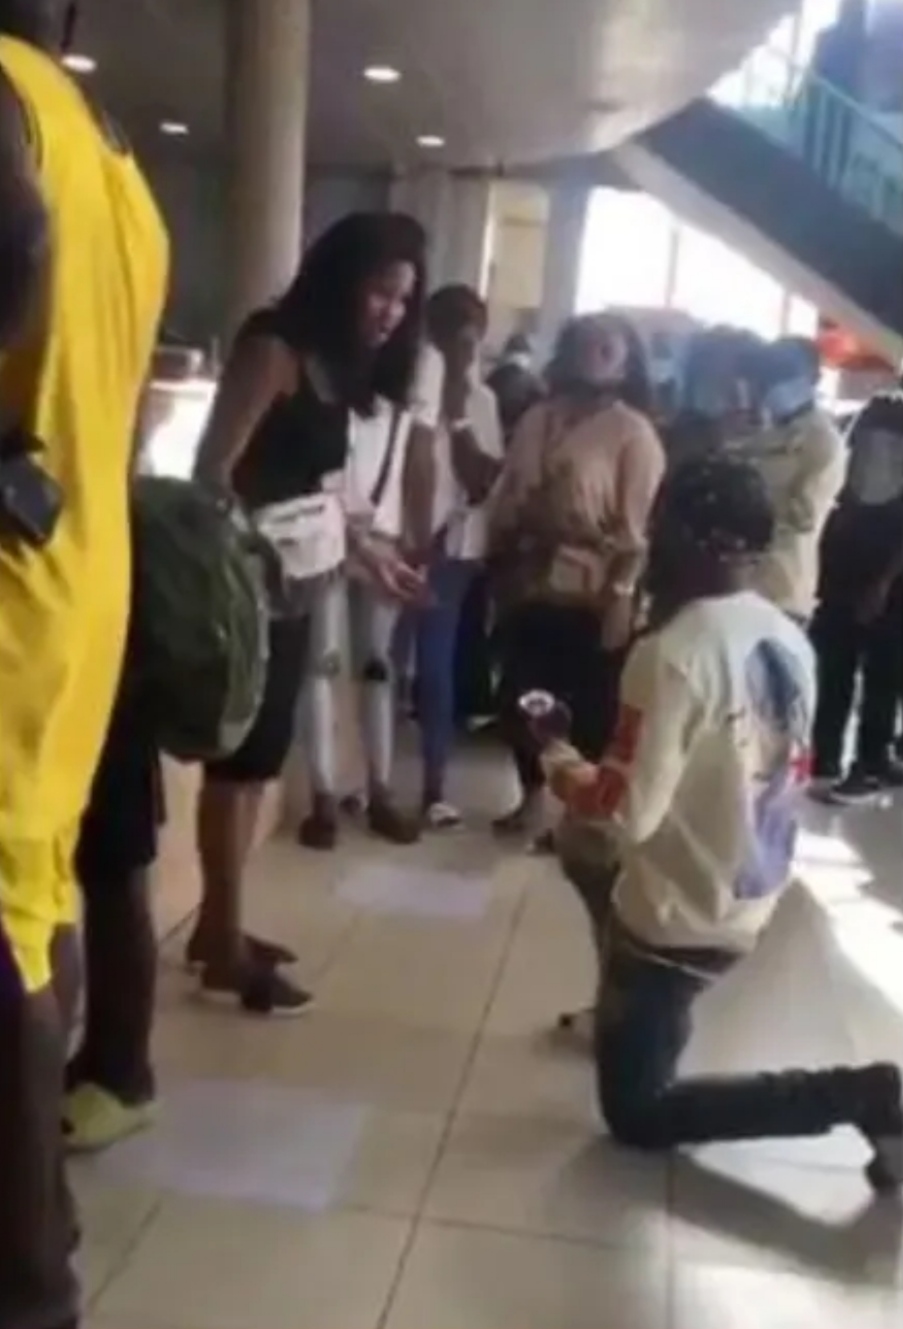 "I Sold My Manhood For Her" - Man Whose Marriage Proposal Was Rejected Cries Out